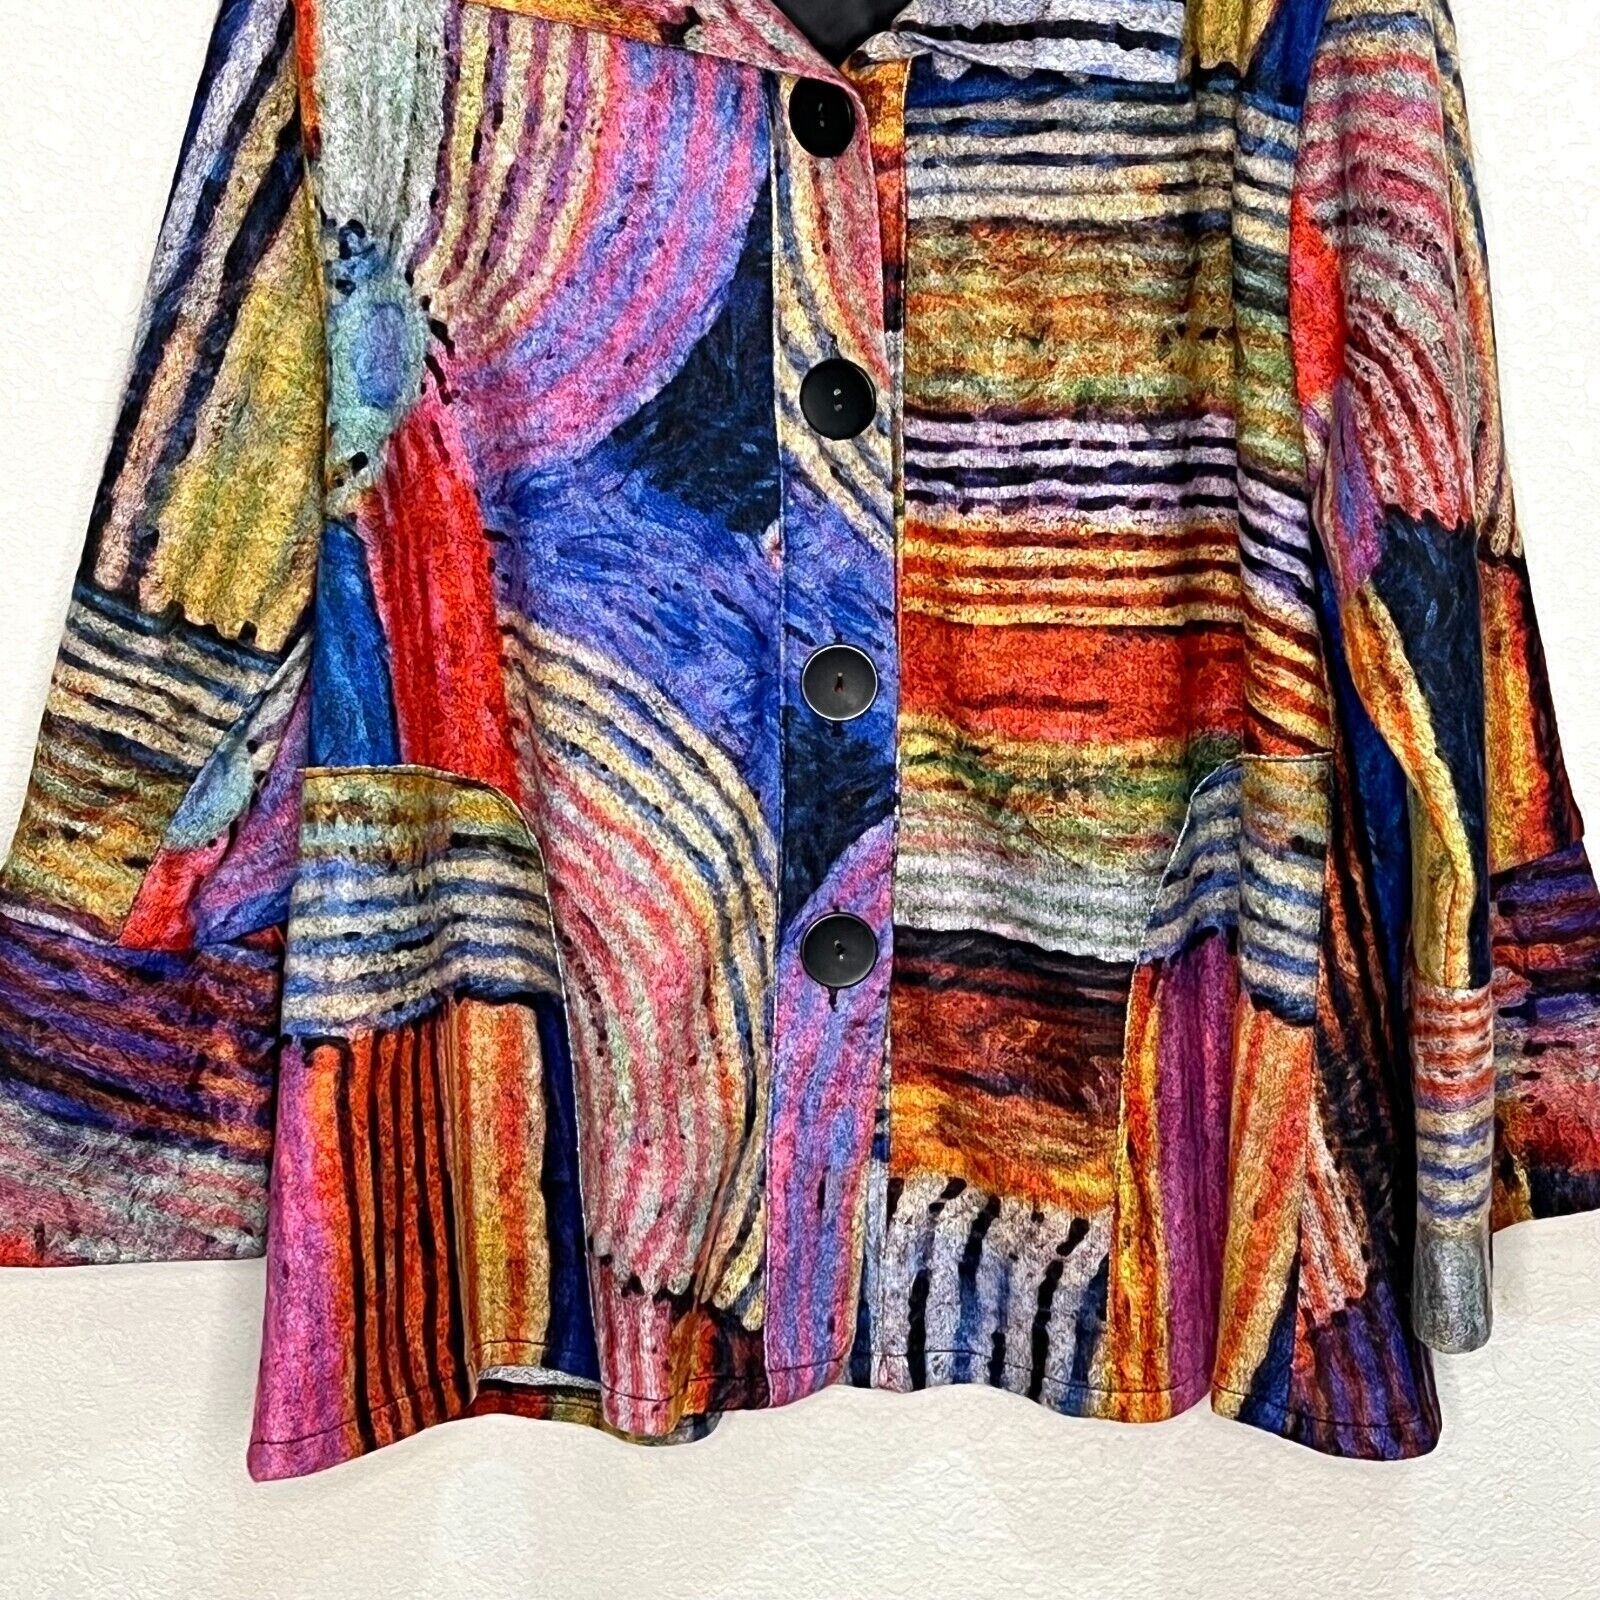 DAMEE Inc Vibrant Abstract Art to Wear Collared Swing Jacket Top Size XL